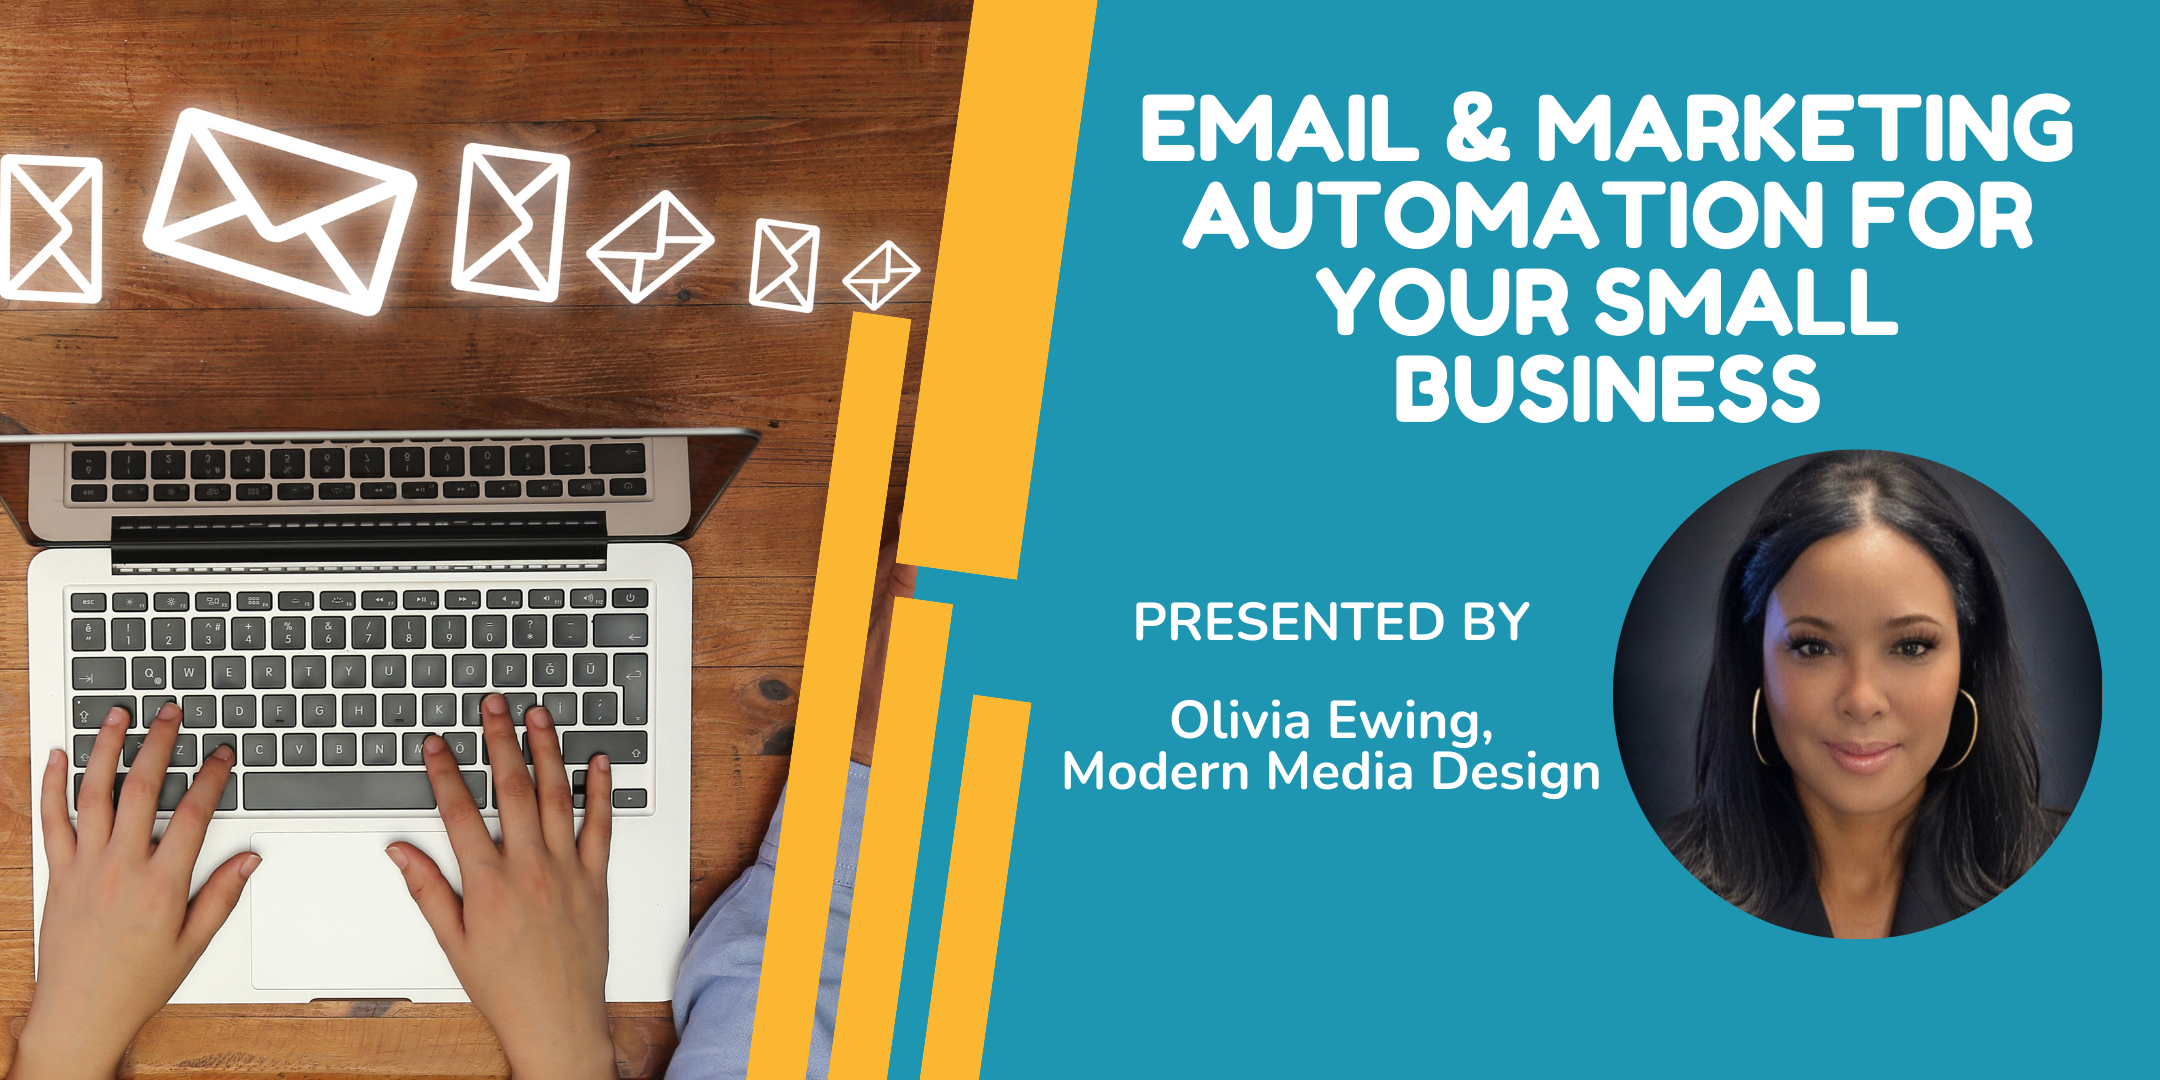 Email and marketing automation for your small business, picture of Olivia Ewing and laptop computer sending emails